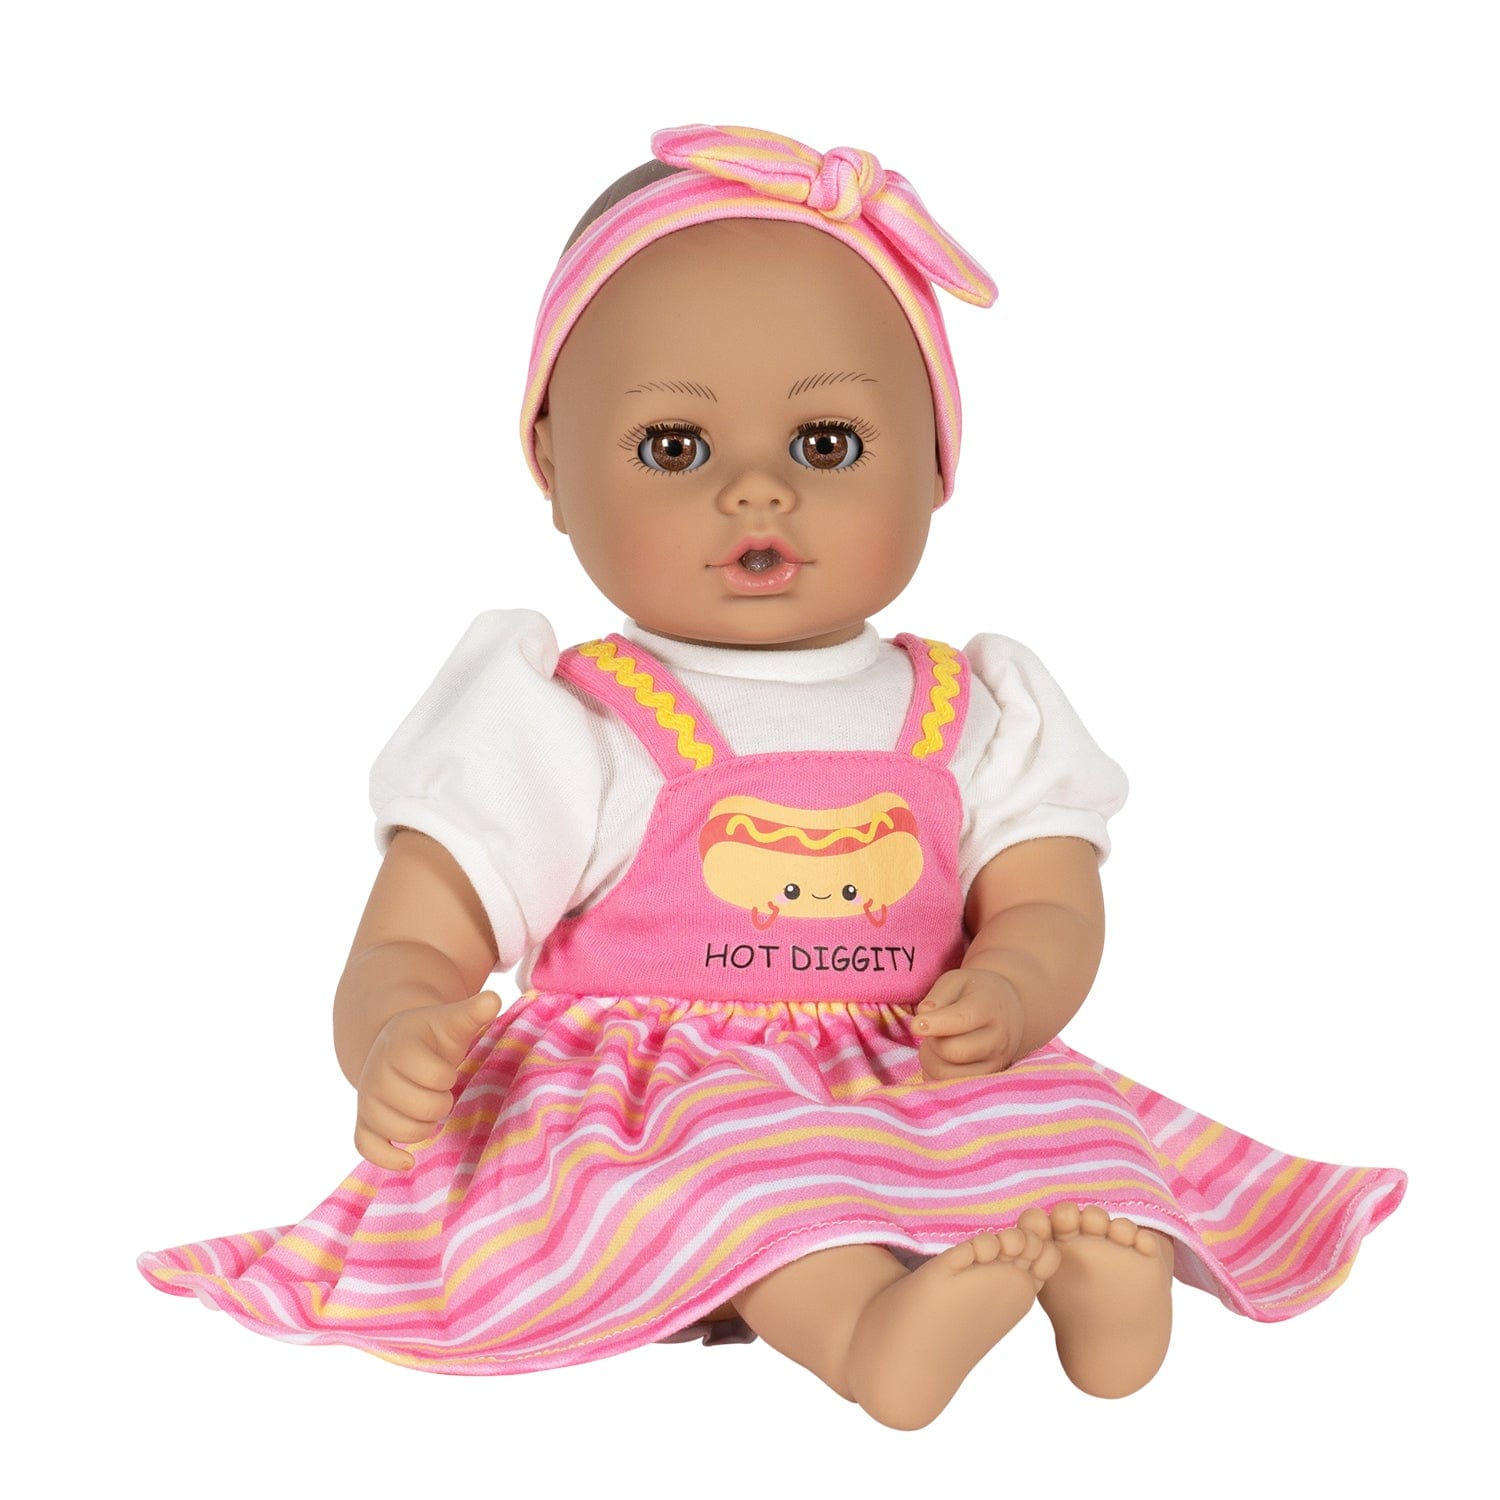 Adora Hot Diggity Dog baby doll set includes one 13-inch doll, a hot dog-printed one-piece dress with white undershirt, matching headband, white bloomers, and a pink baby bottle. Made for Ages 1+.